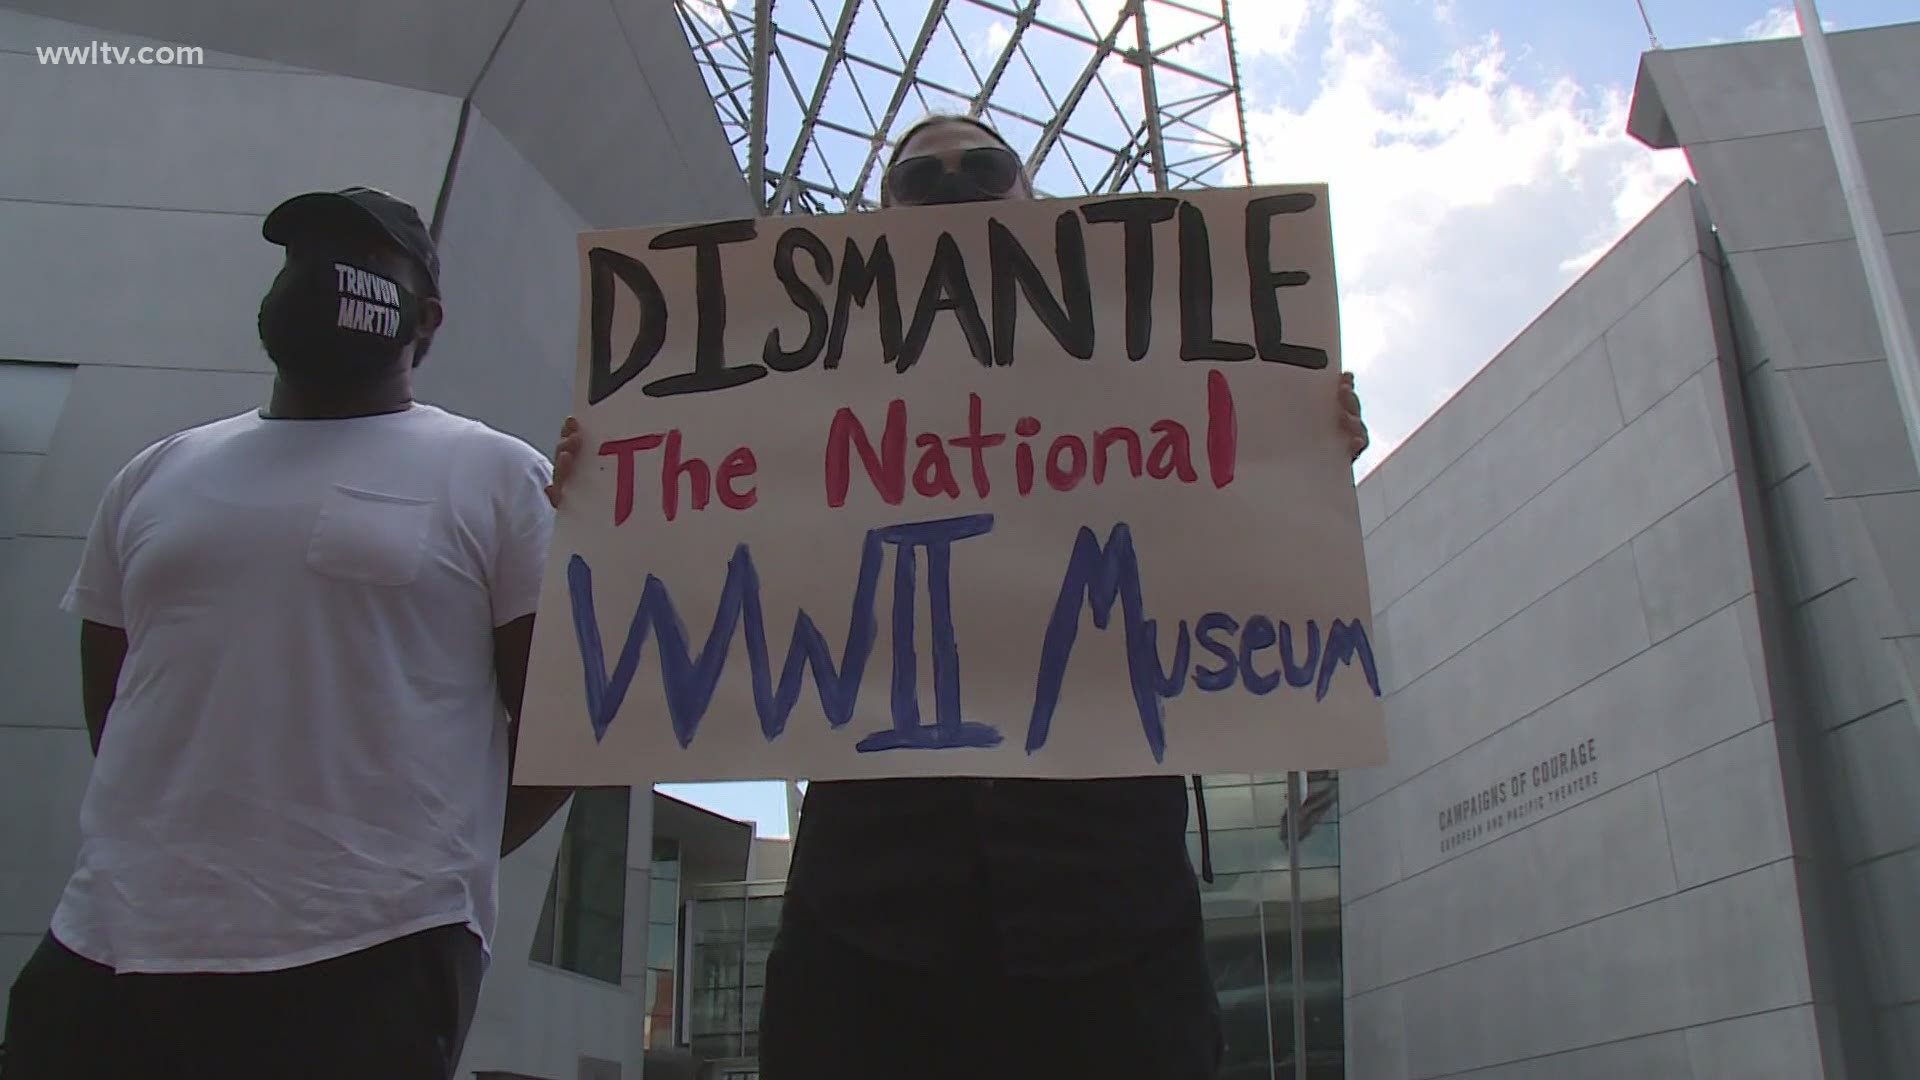 Employees at the WWII Museum are demanding for more diversity and equality in the work place.